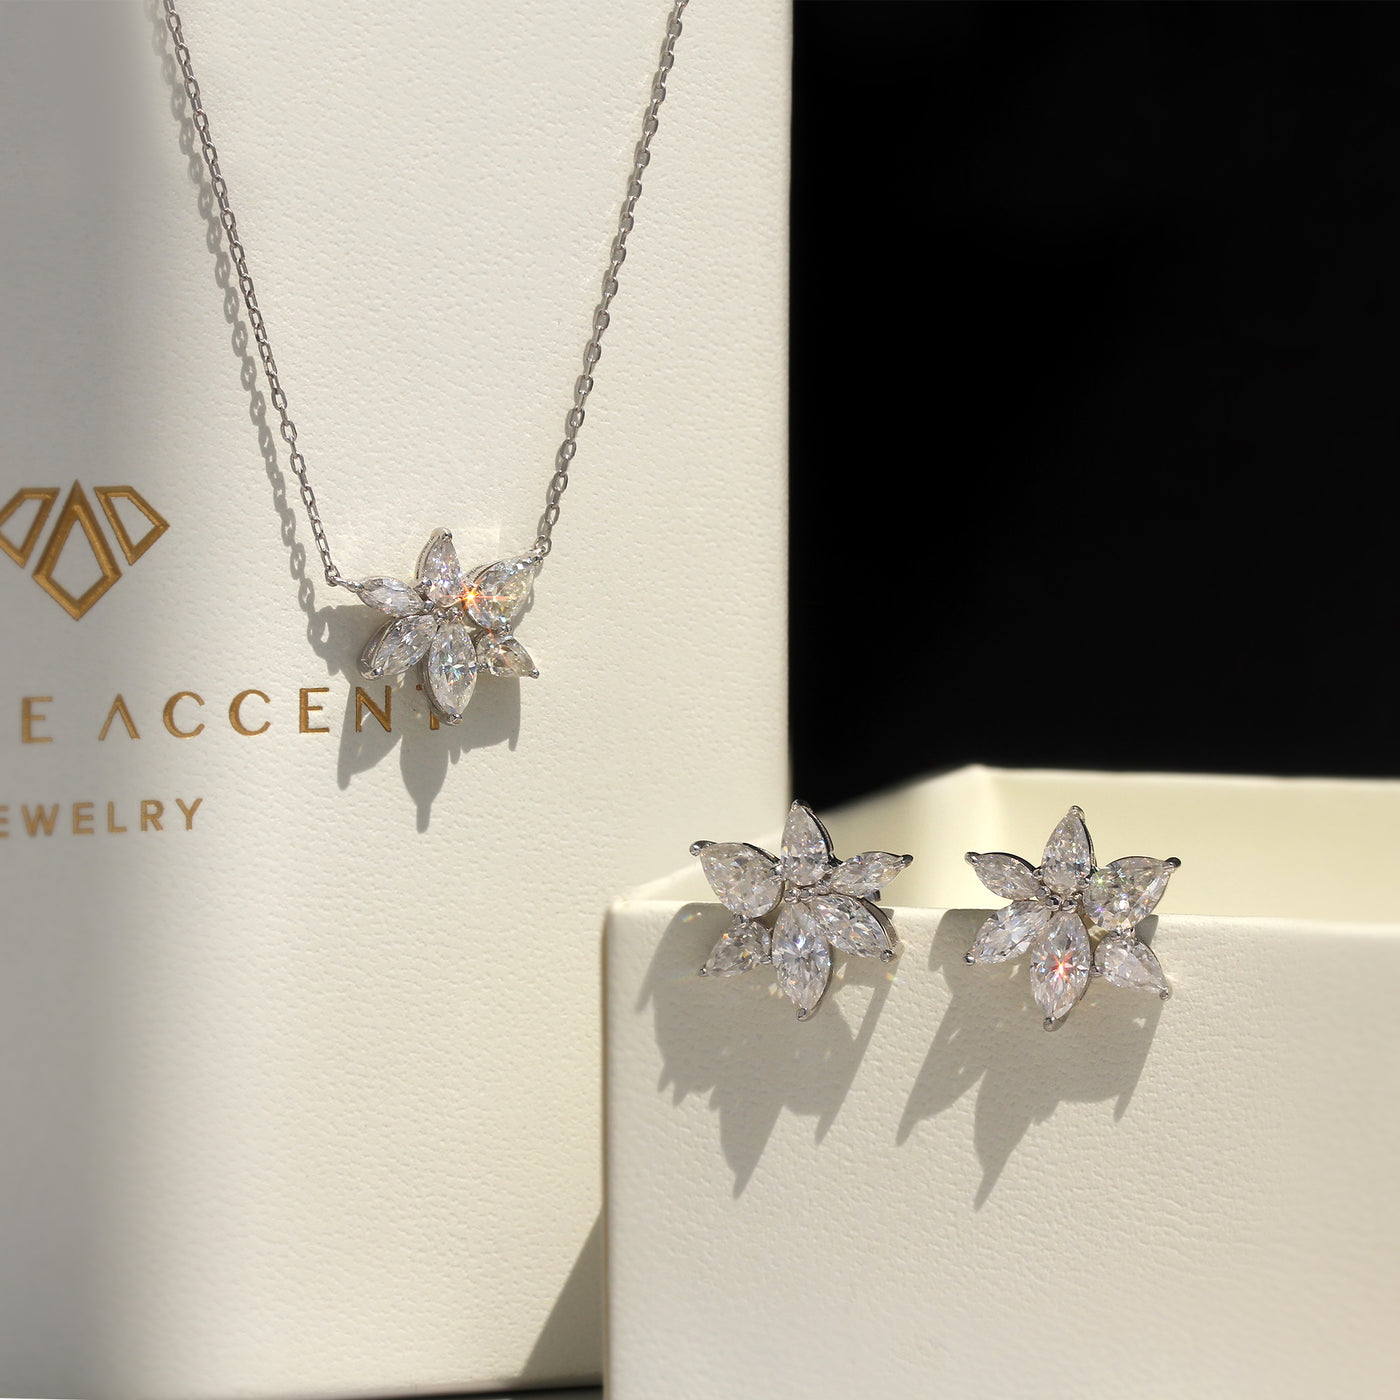 Sunlit Petals Moissanite Cluster Jewelry: Earrings and Necklace